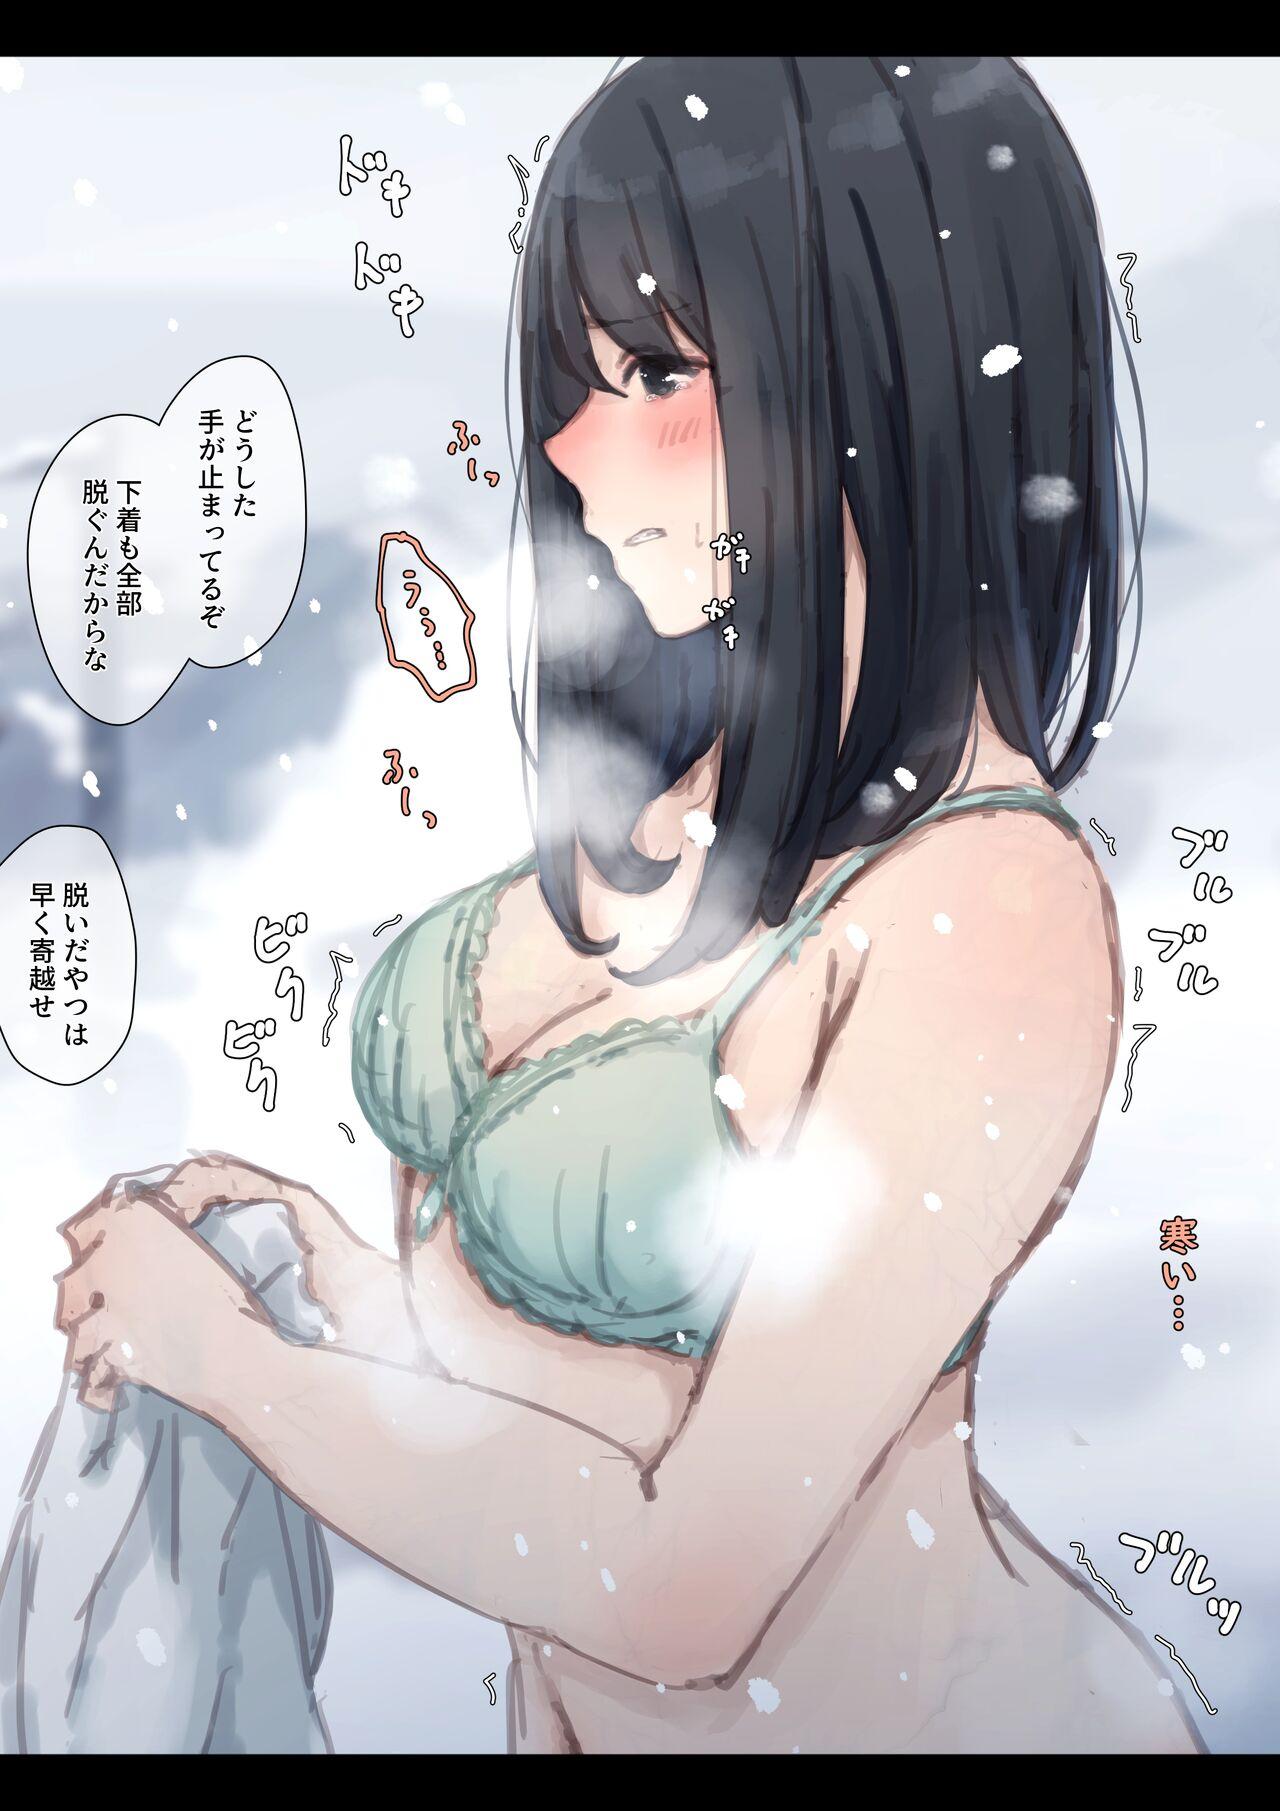 [Yukimuramaru] Public property Sex Slave Girl - Ex - Collection in the Snow - [Digital] [Ongoing] 24